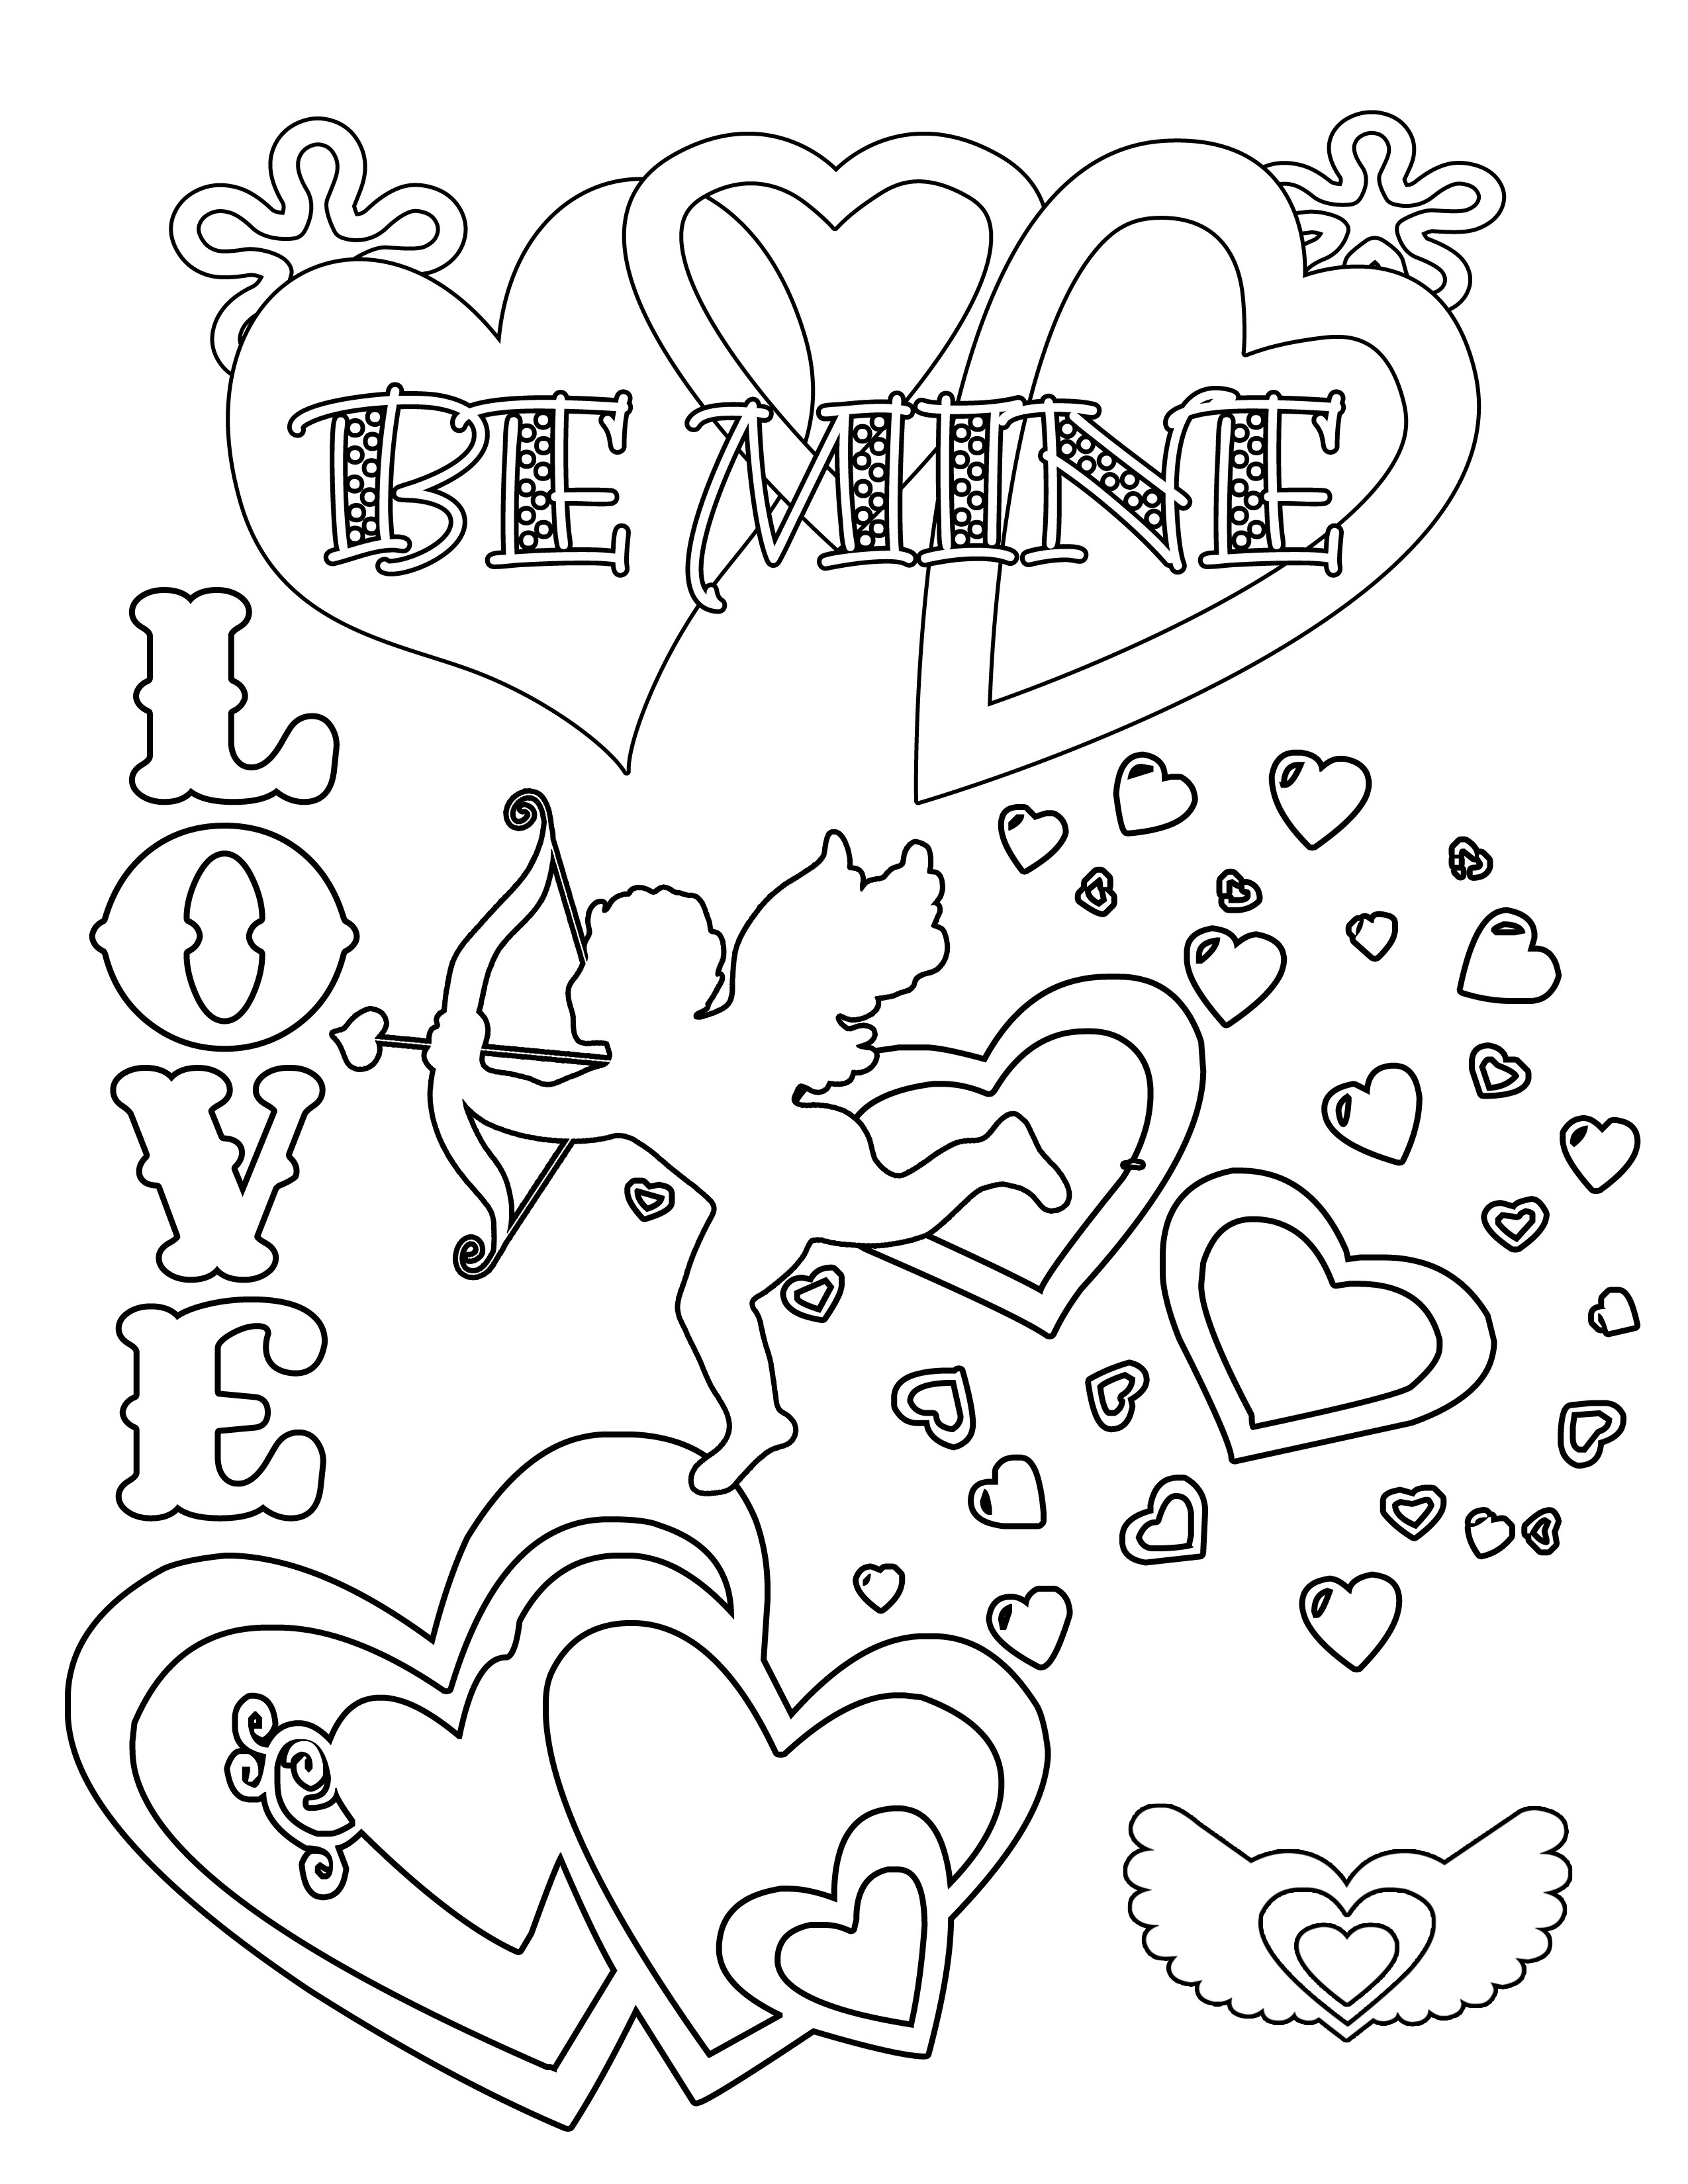 Free Printable Valentines Day Coloring Pages
 Party Simplicity Free Valentines Day Coloring Pages and